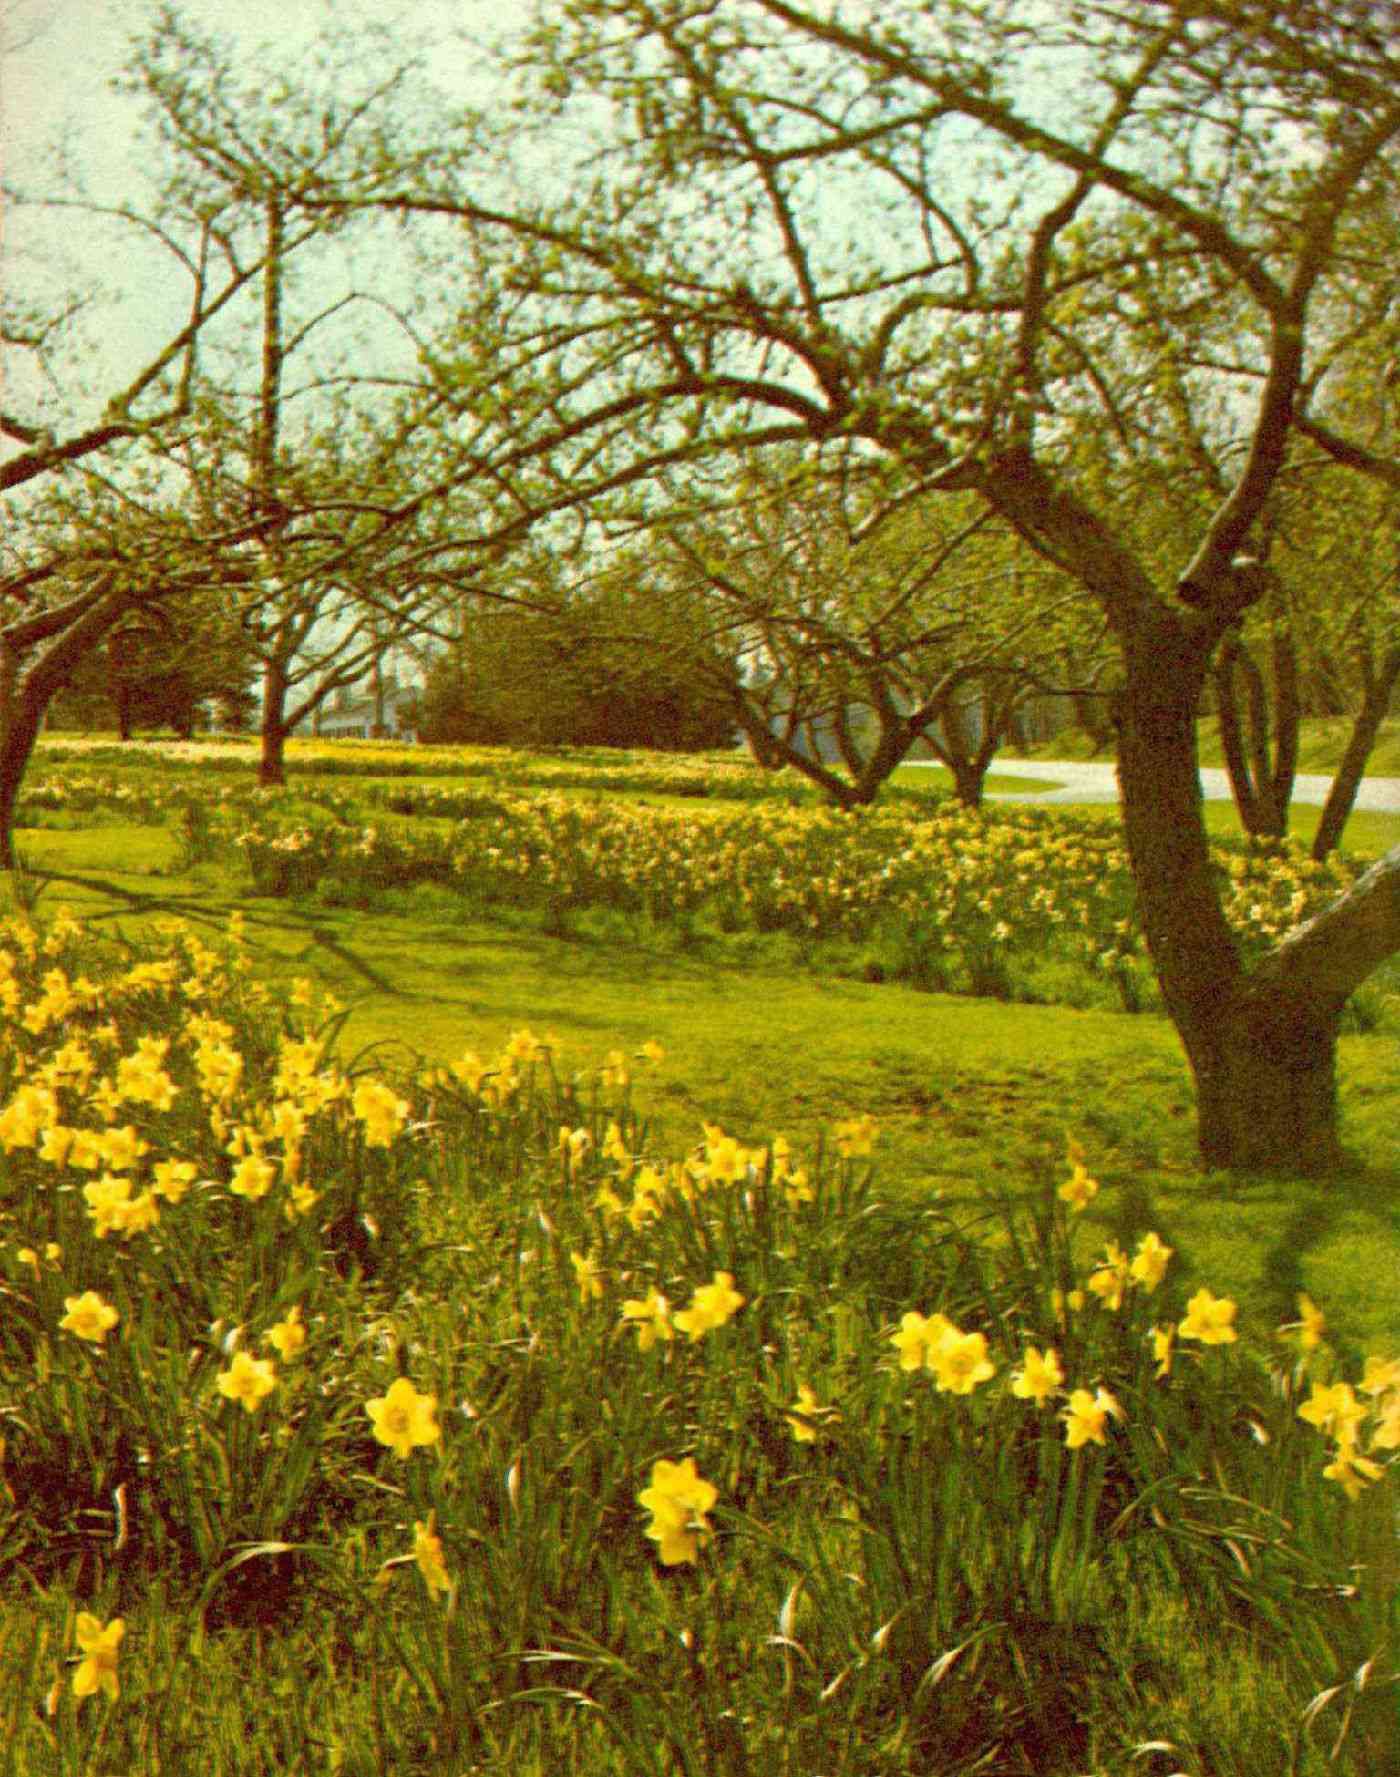 Spring comes to the Reader's Digest headquarters, 1977